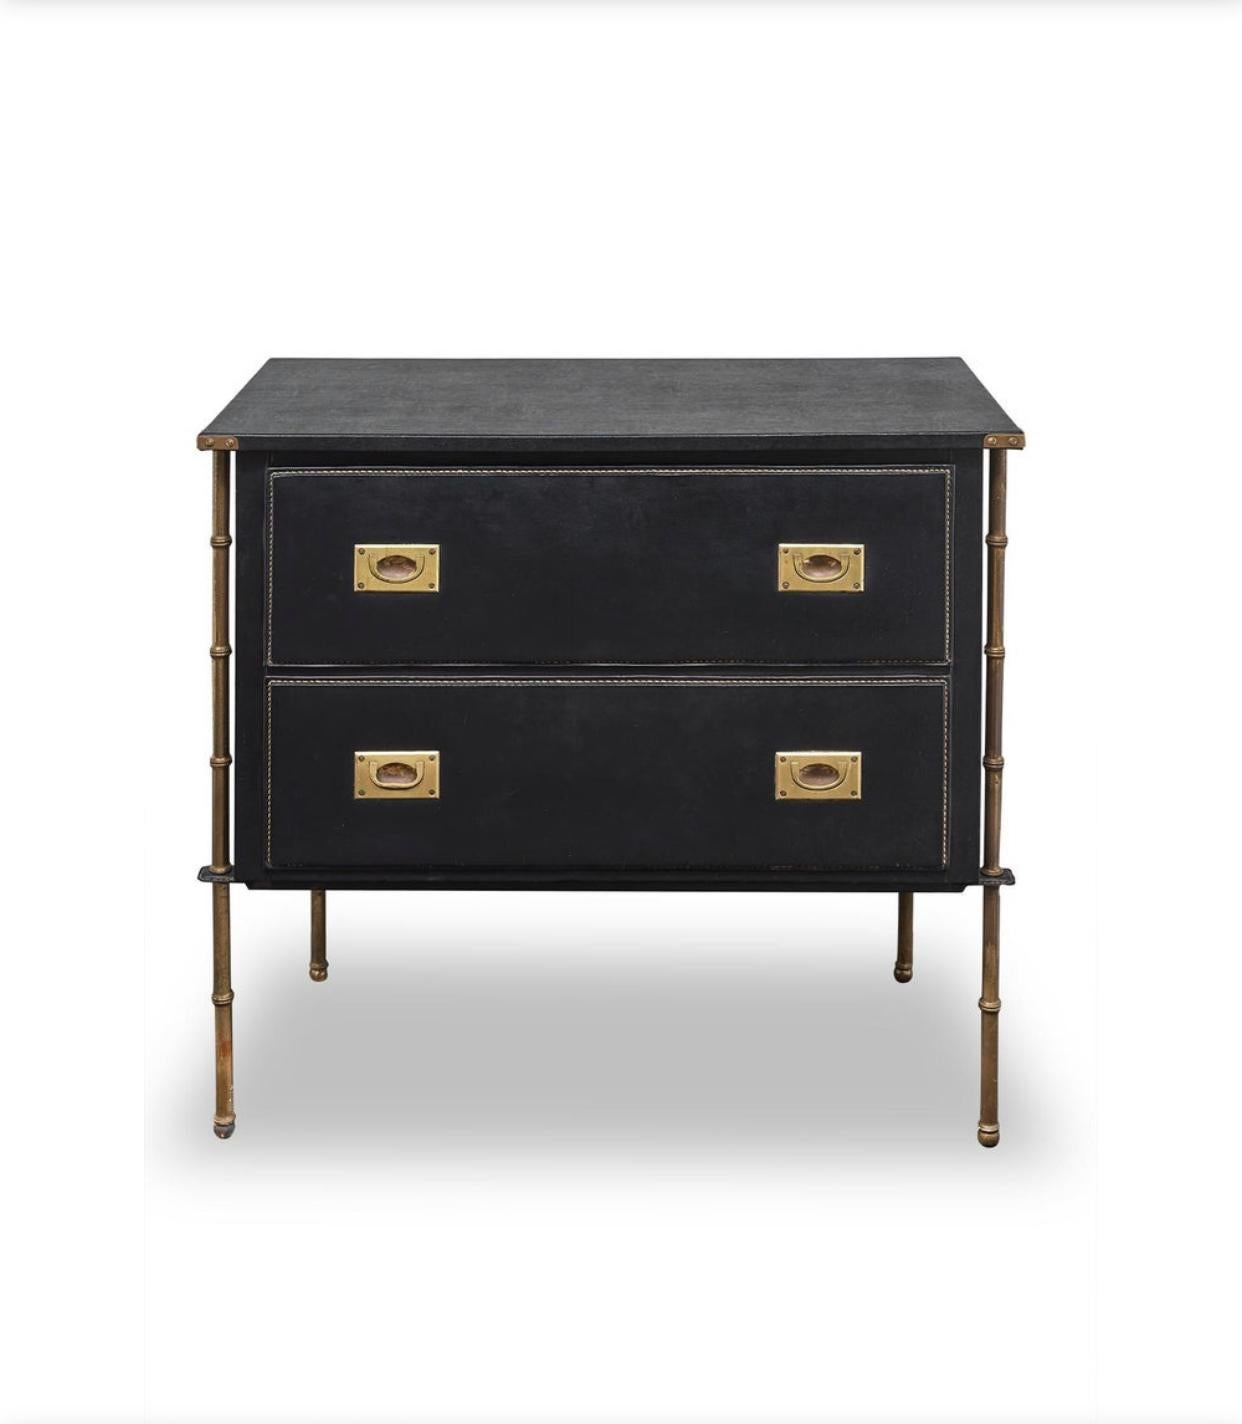 Jacques Adnet dresser sheathed in black sewn leather upholstery opening with two drawers resting on a bamboo brass base
from 1950.